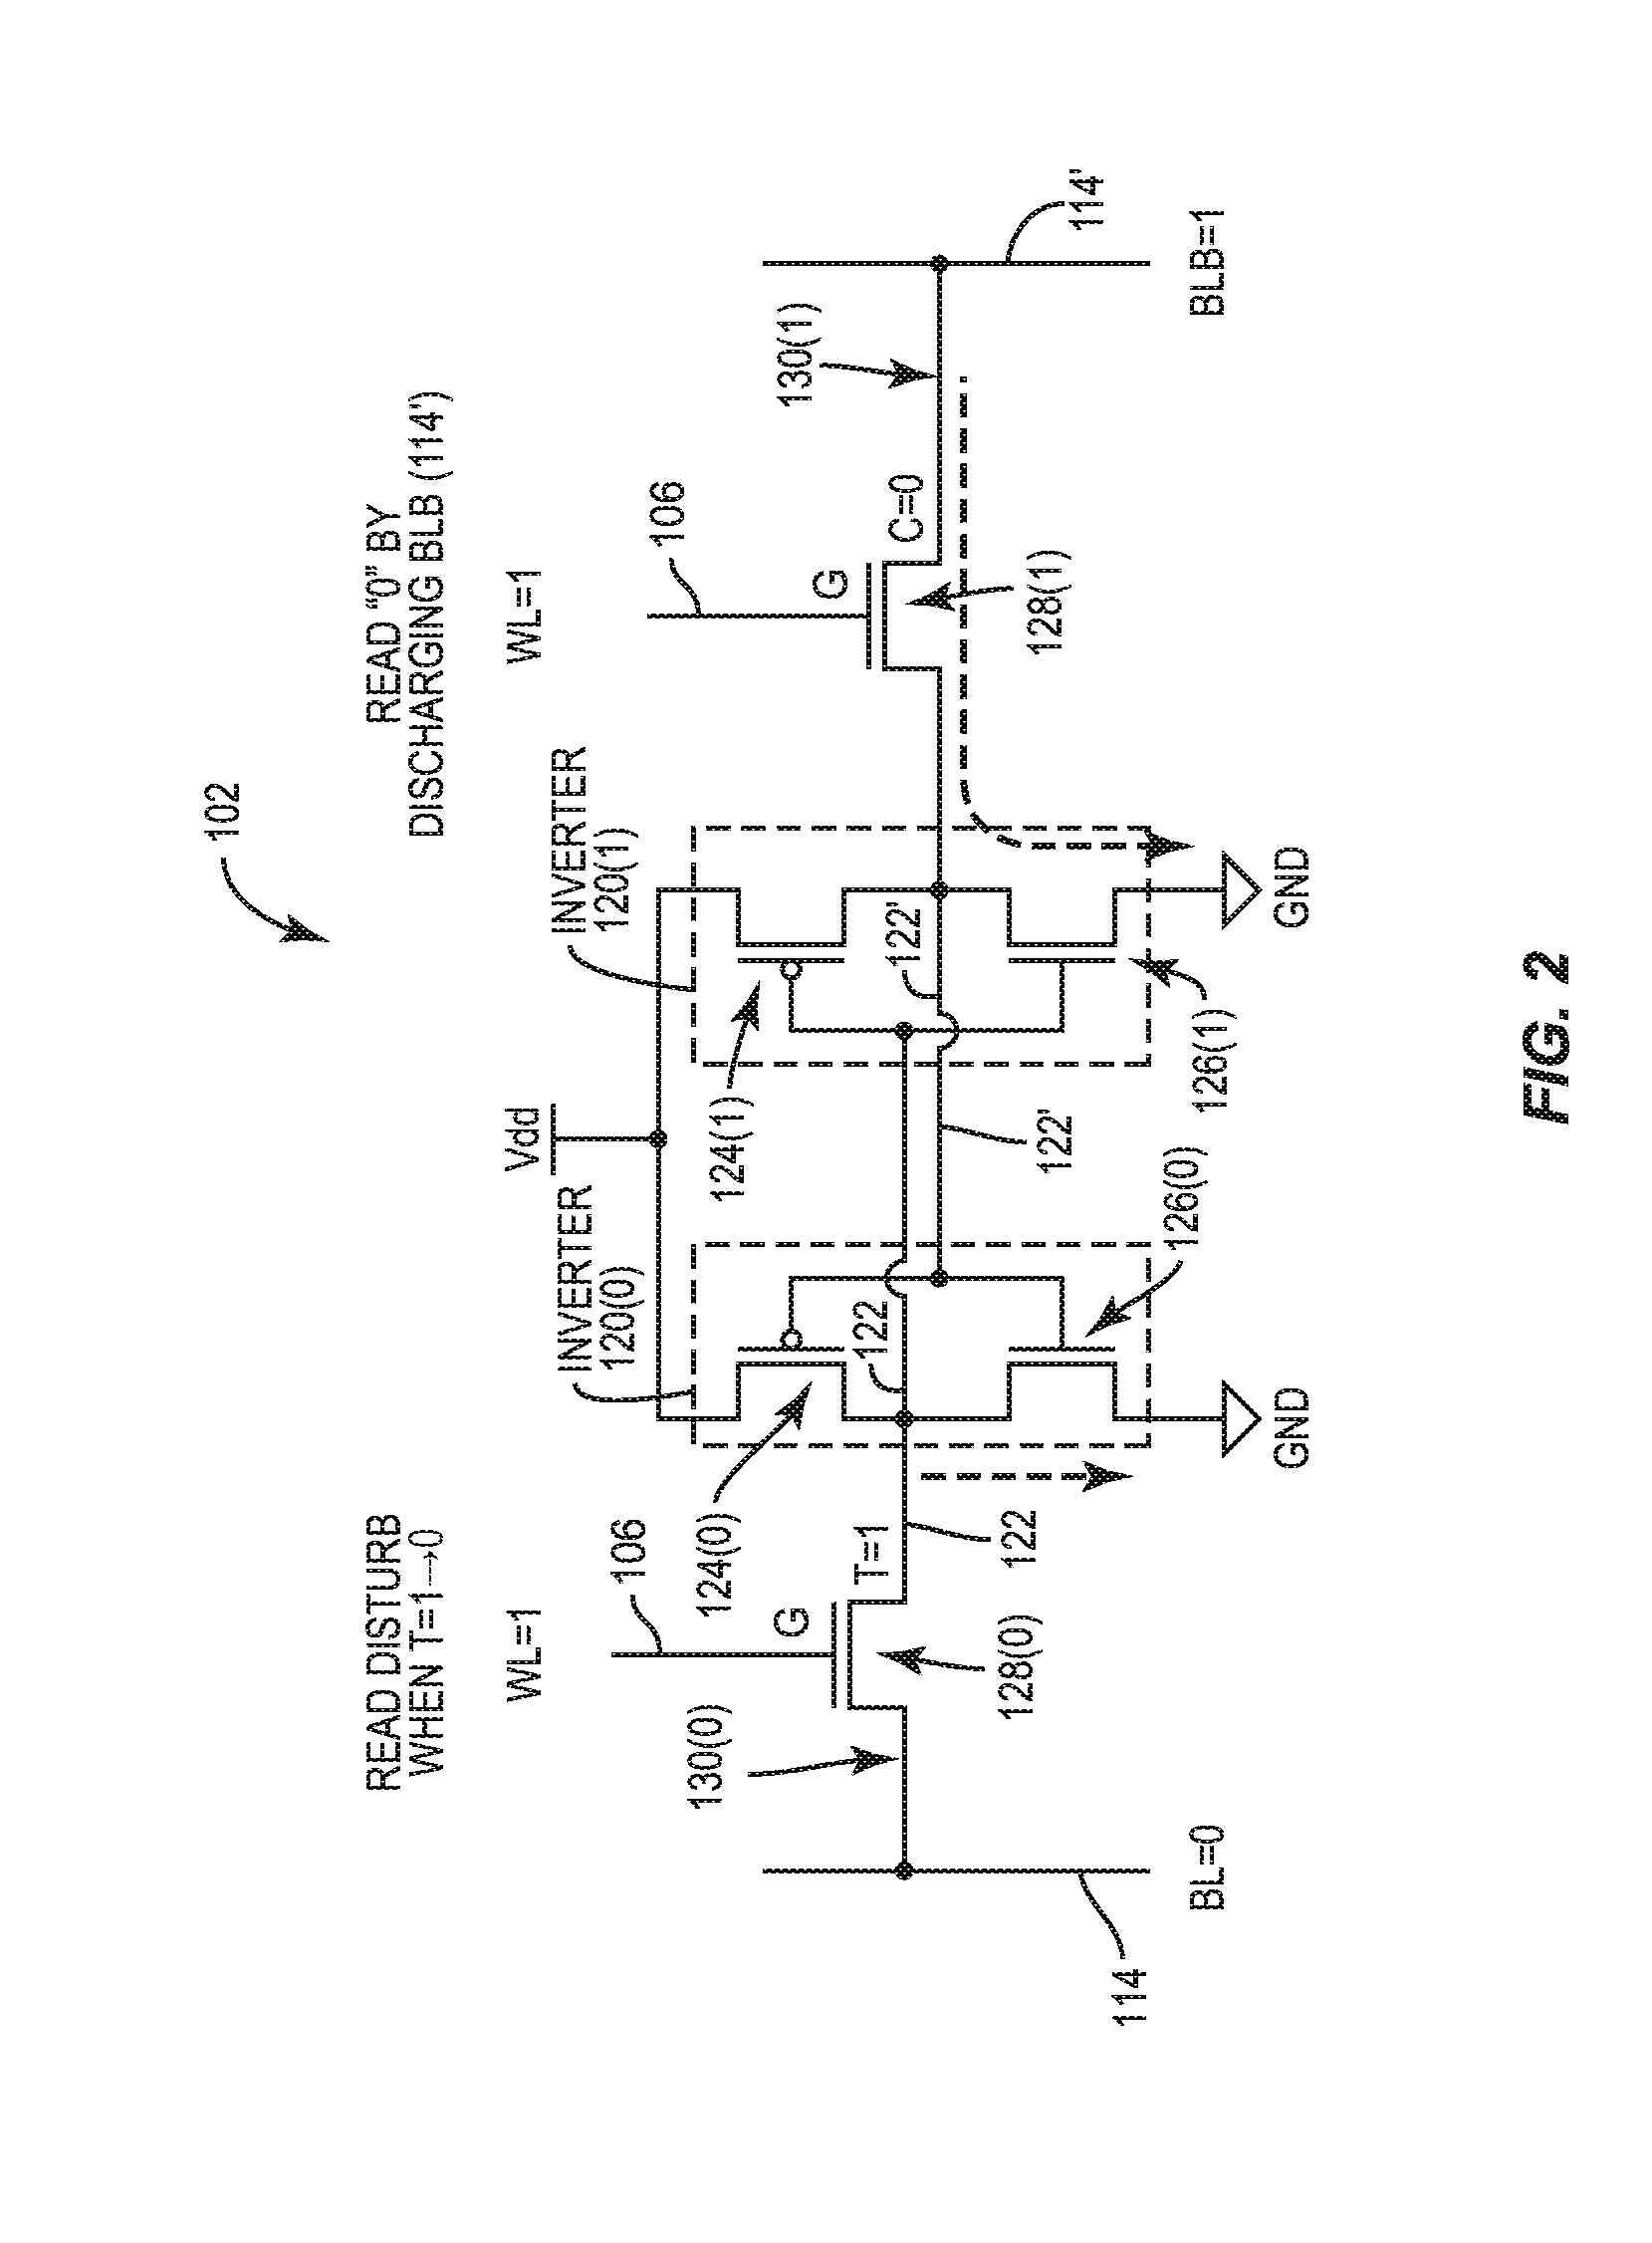 Bitline positive boost write-assist circuits for memory bit cells employing a p-type field-effect transistor (PFET) write port(s), and related systems and methods